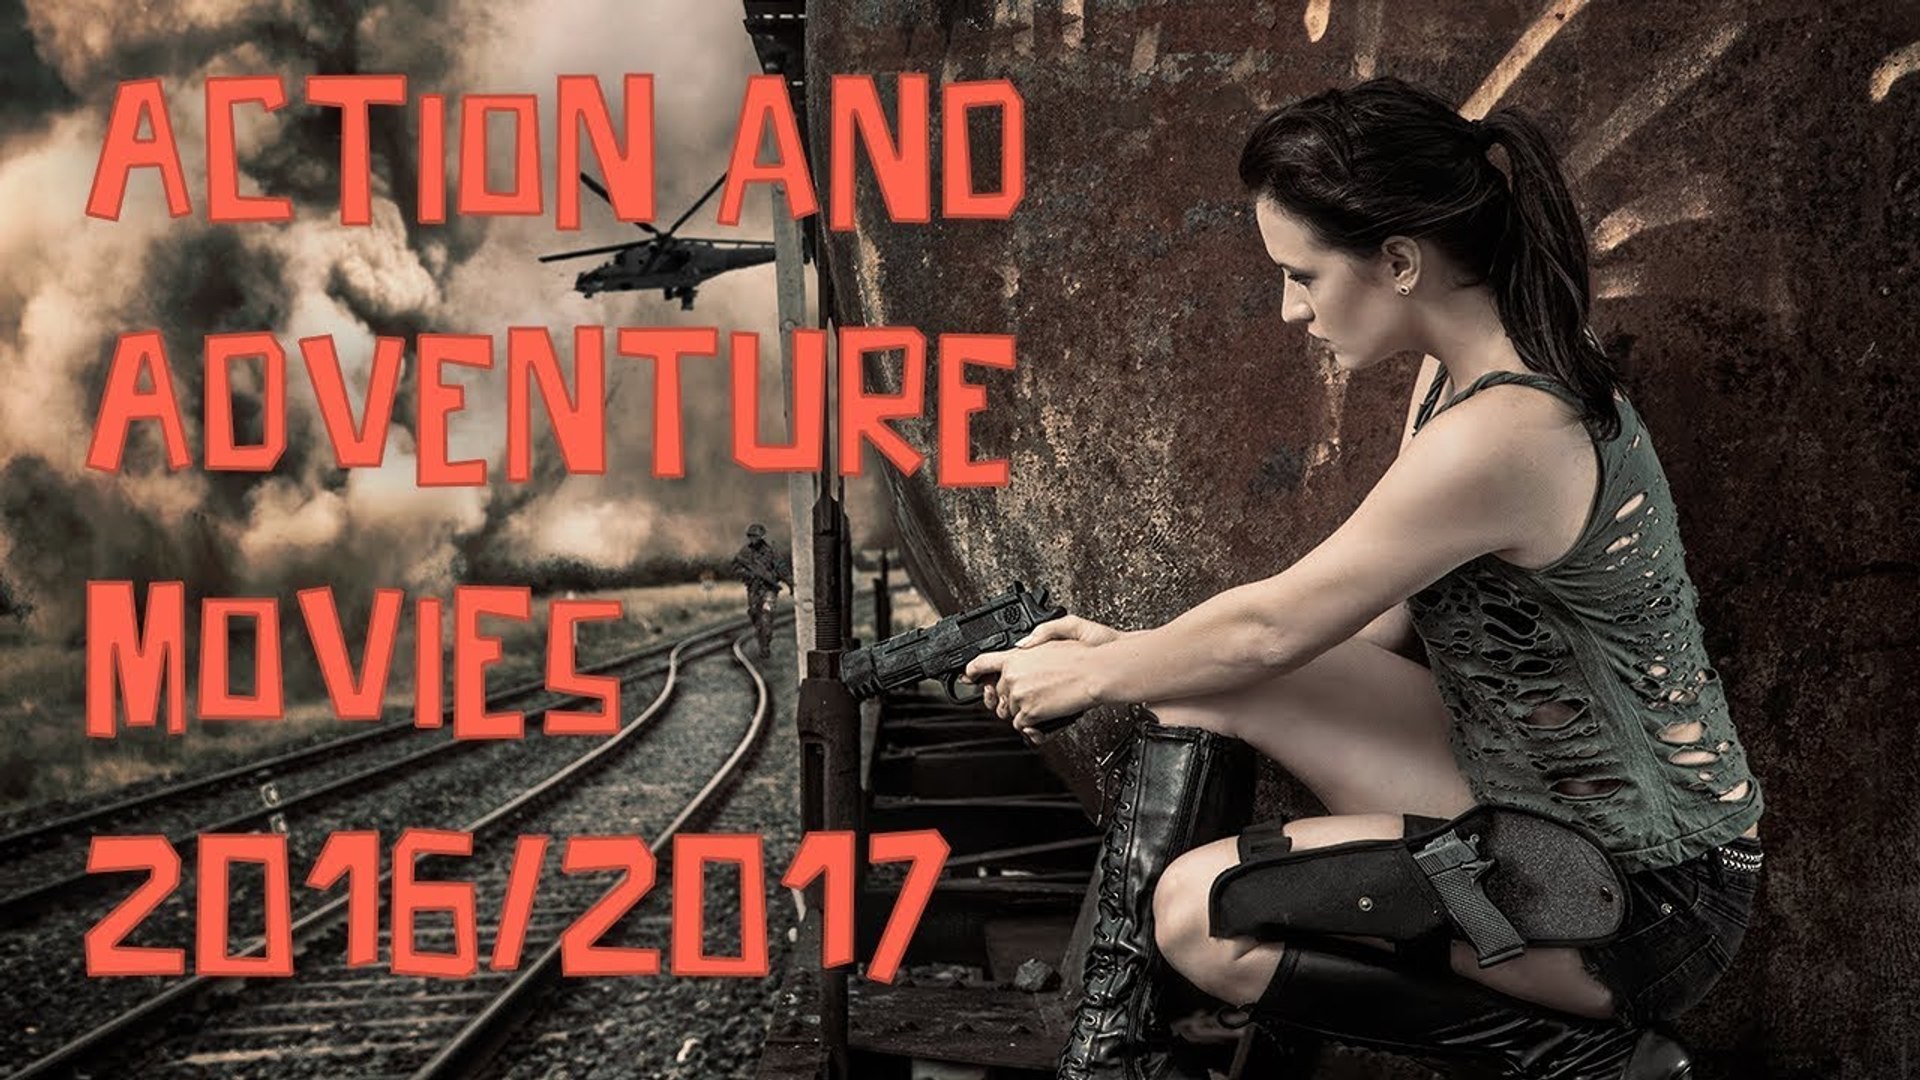 Best Action and Adventure Movies 2016/2017: See top action films